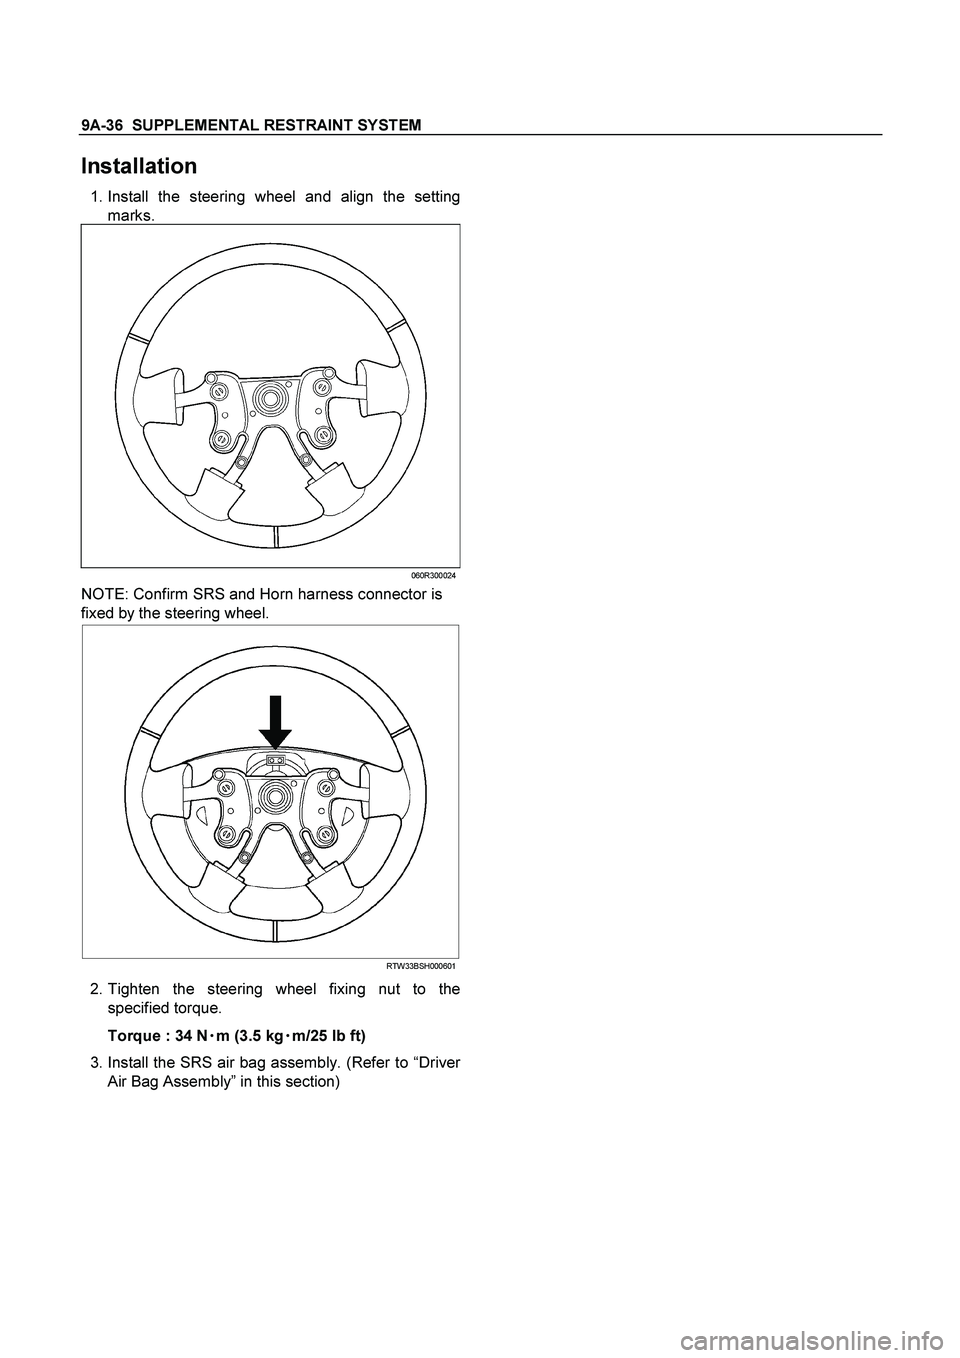 ISUZU TF SERIES 2004  Workshop Manual 9A-36  SUPPLEMENTAL RESTRAINT SYSTEM
 
Installation 
 1. Install the steering wheel and align the setting
marks. 
060R300024
NOTE: Confirm SRS and Horn harness connector is 
fixed by the steering whee